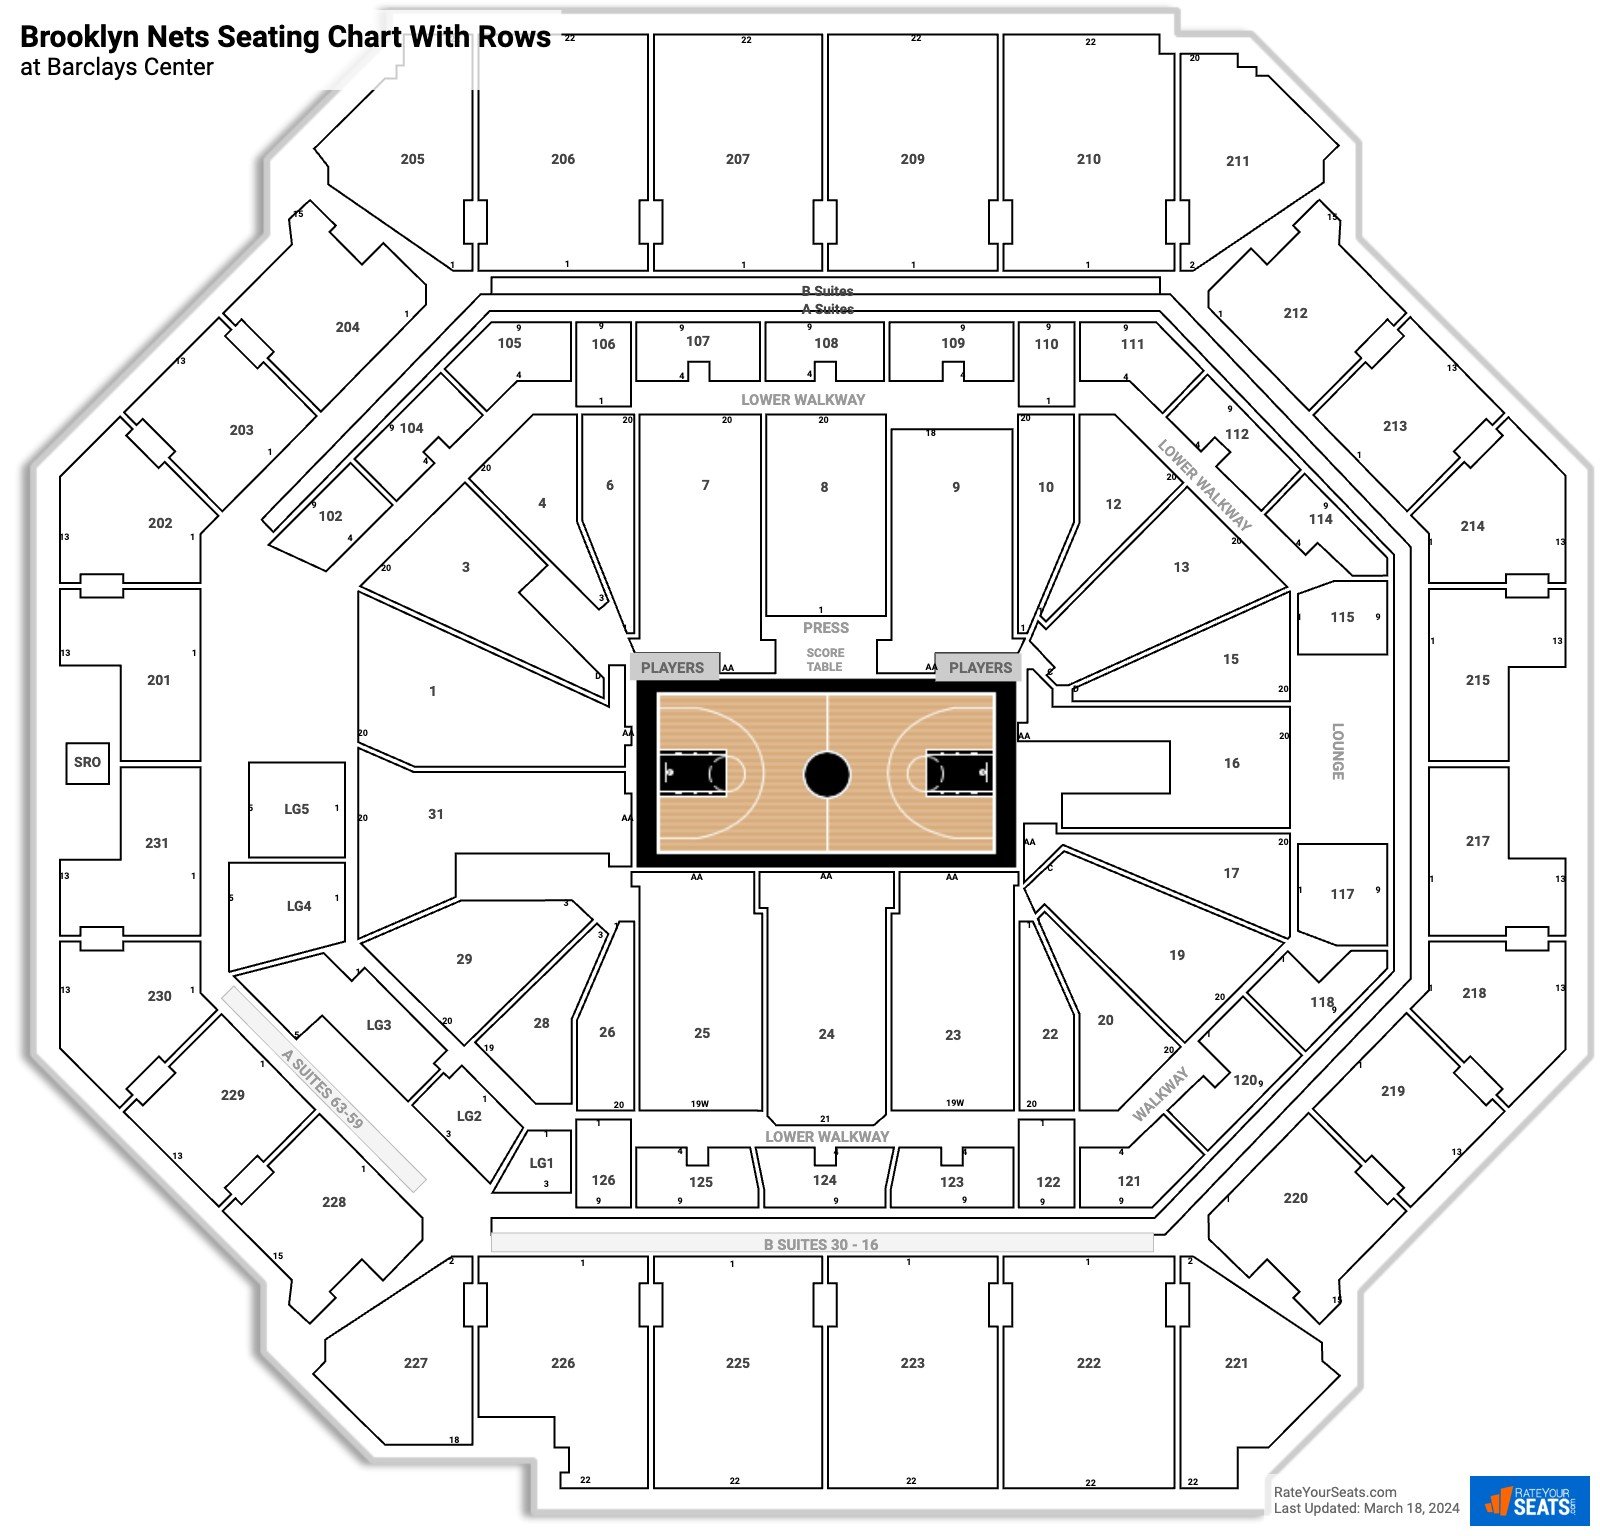 Barclays Center seating chart with row numbers